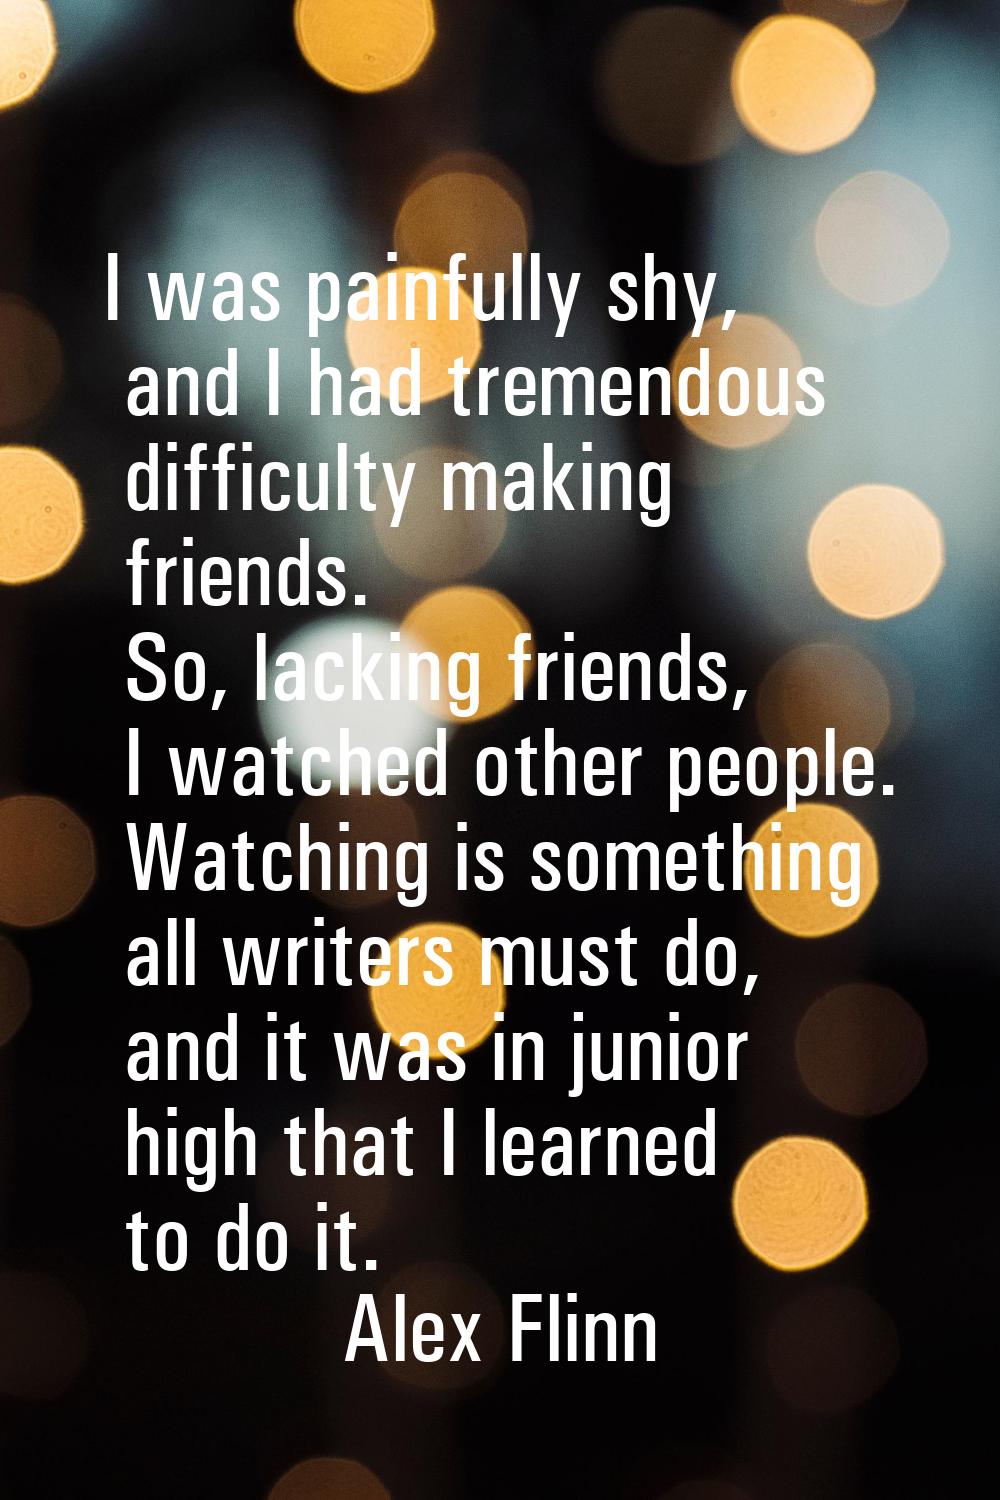 I was painfully shy, and I had tremendous difficulty making friends. So, lacking friends, I watched